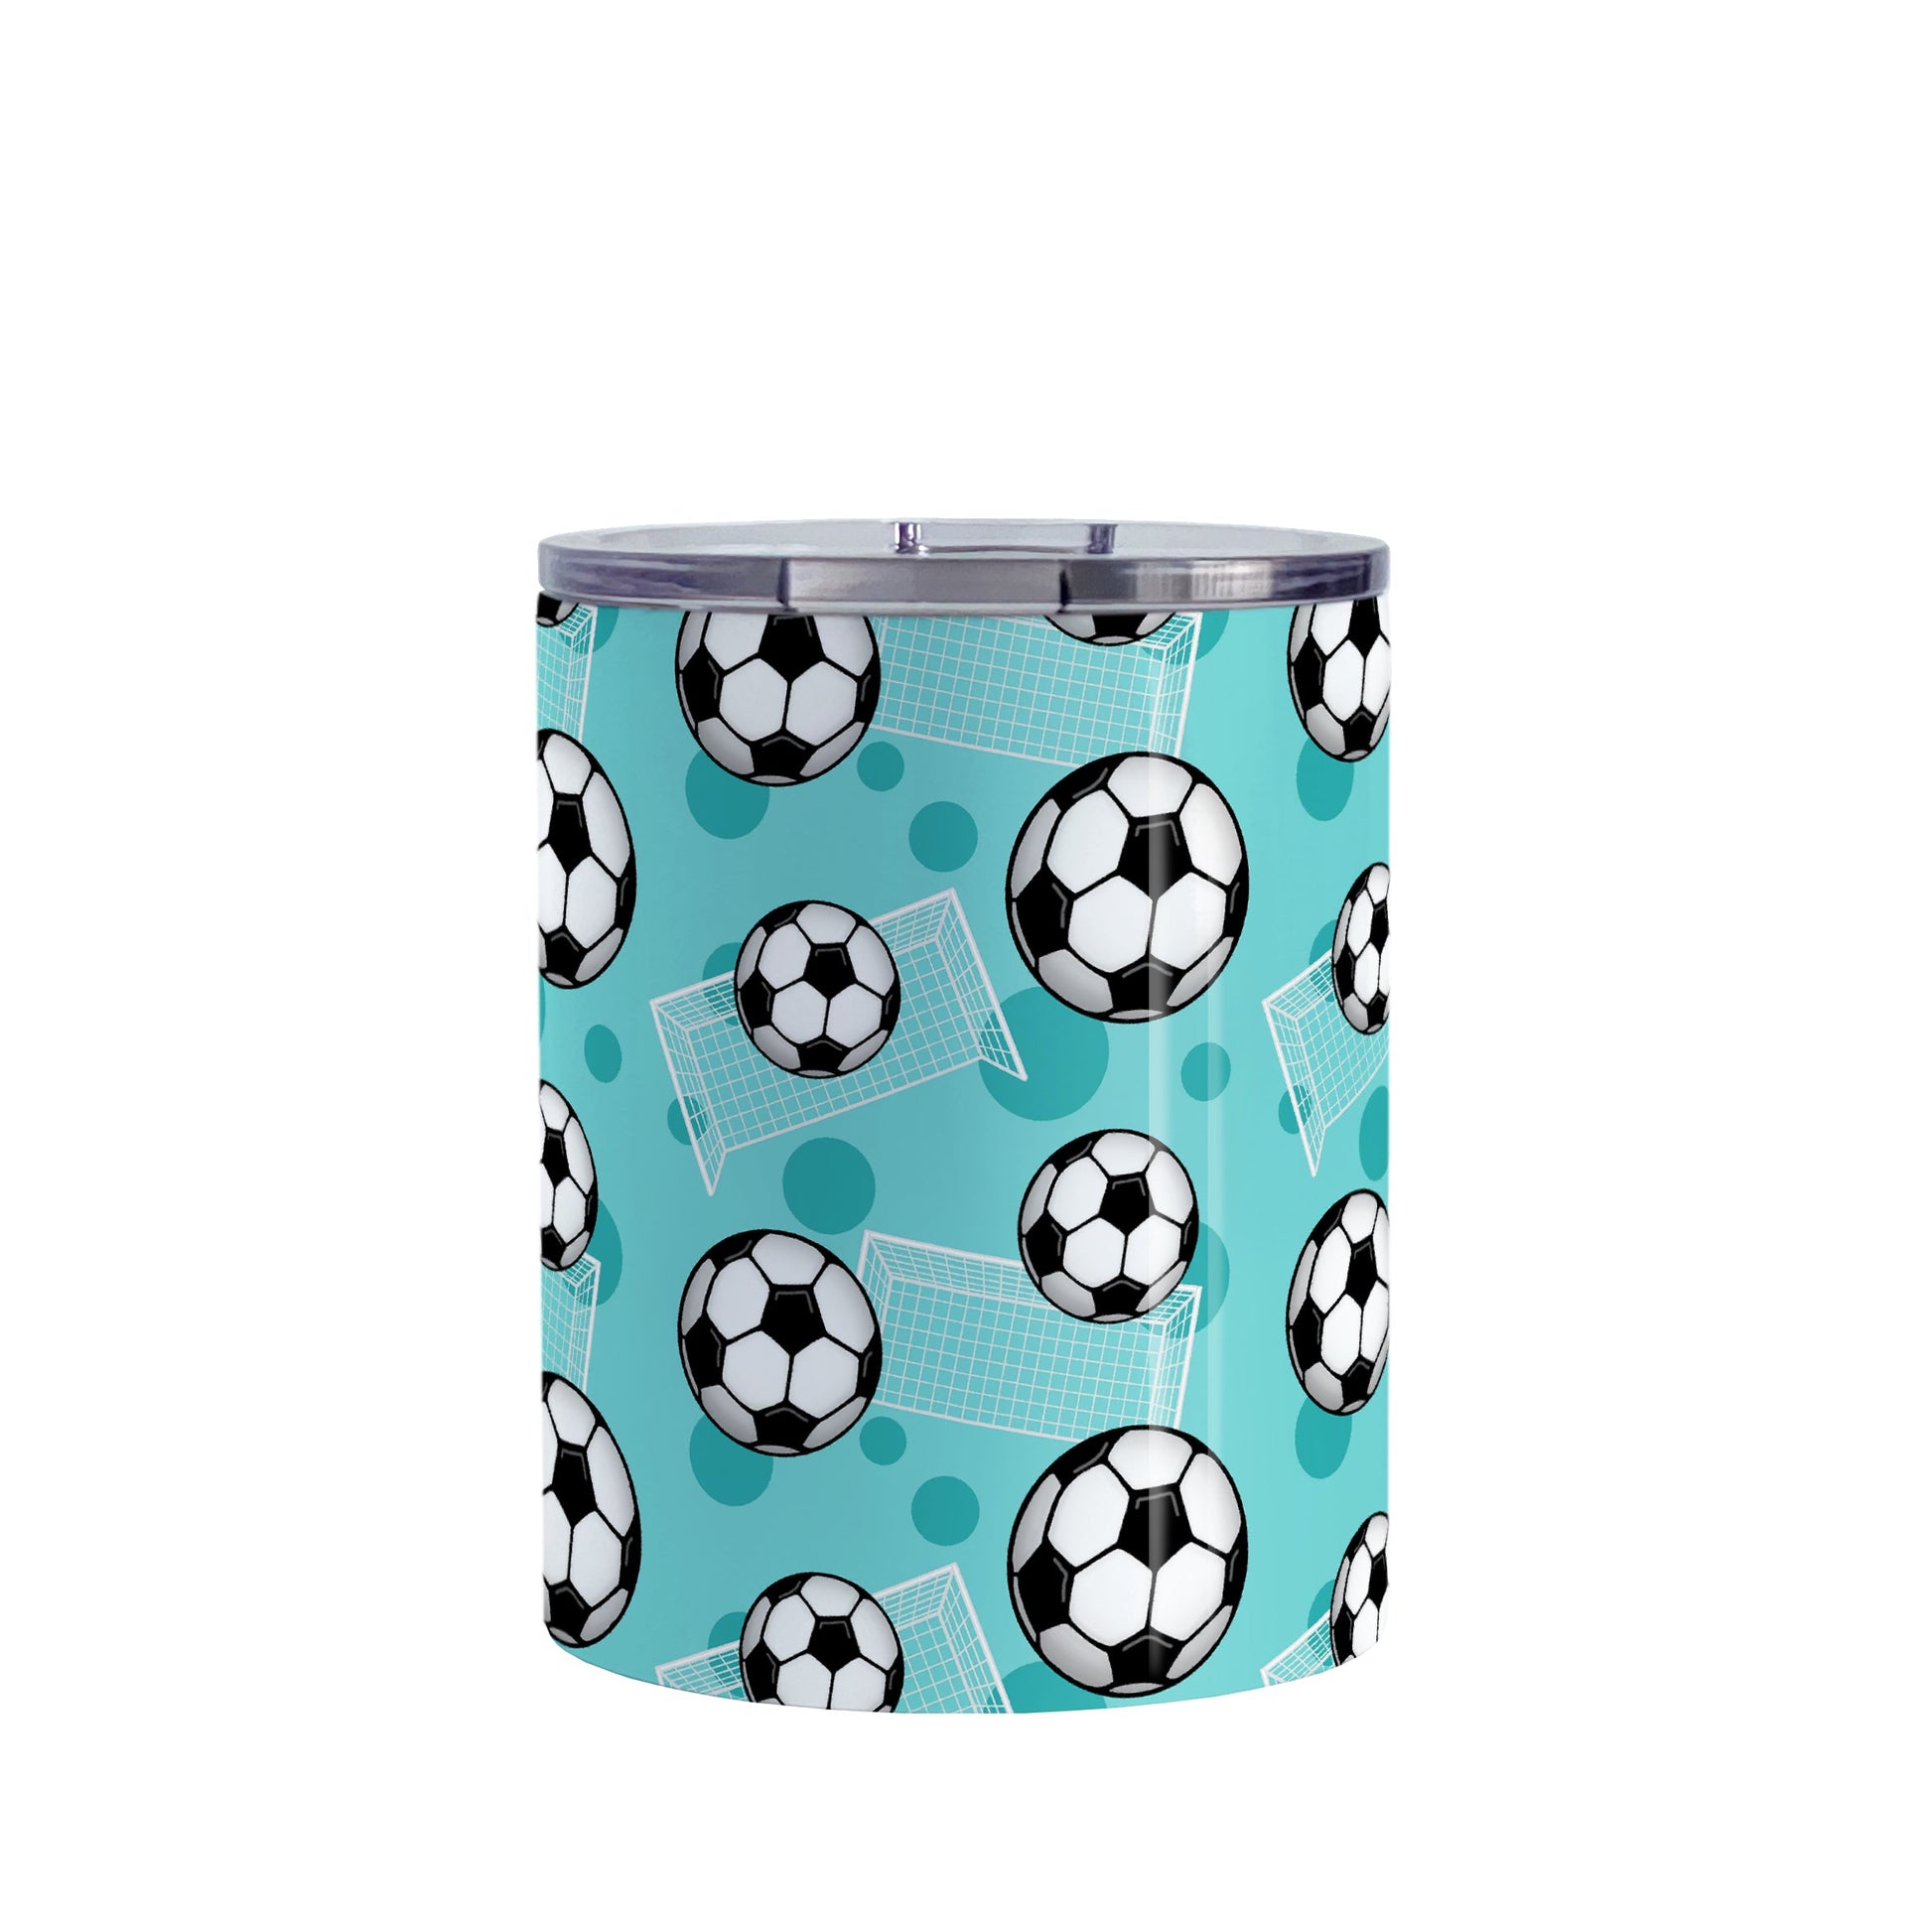 Soccer Ball and Goal Pattern Teal Tumbler Cup (10oz) at Amy's Coffee Mugs. A stainless steel insulated tumbler cup designed with a pattern of soccer balls and goals over a teal background that wraps around the cup. This teal soccer tumbler cup is perfect for people who love or play soccer.